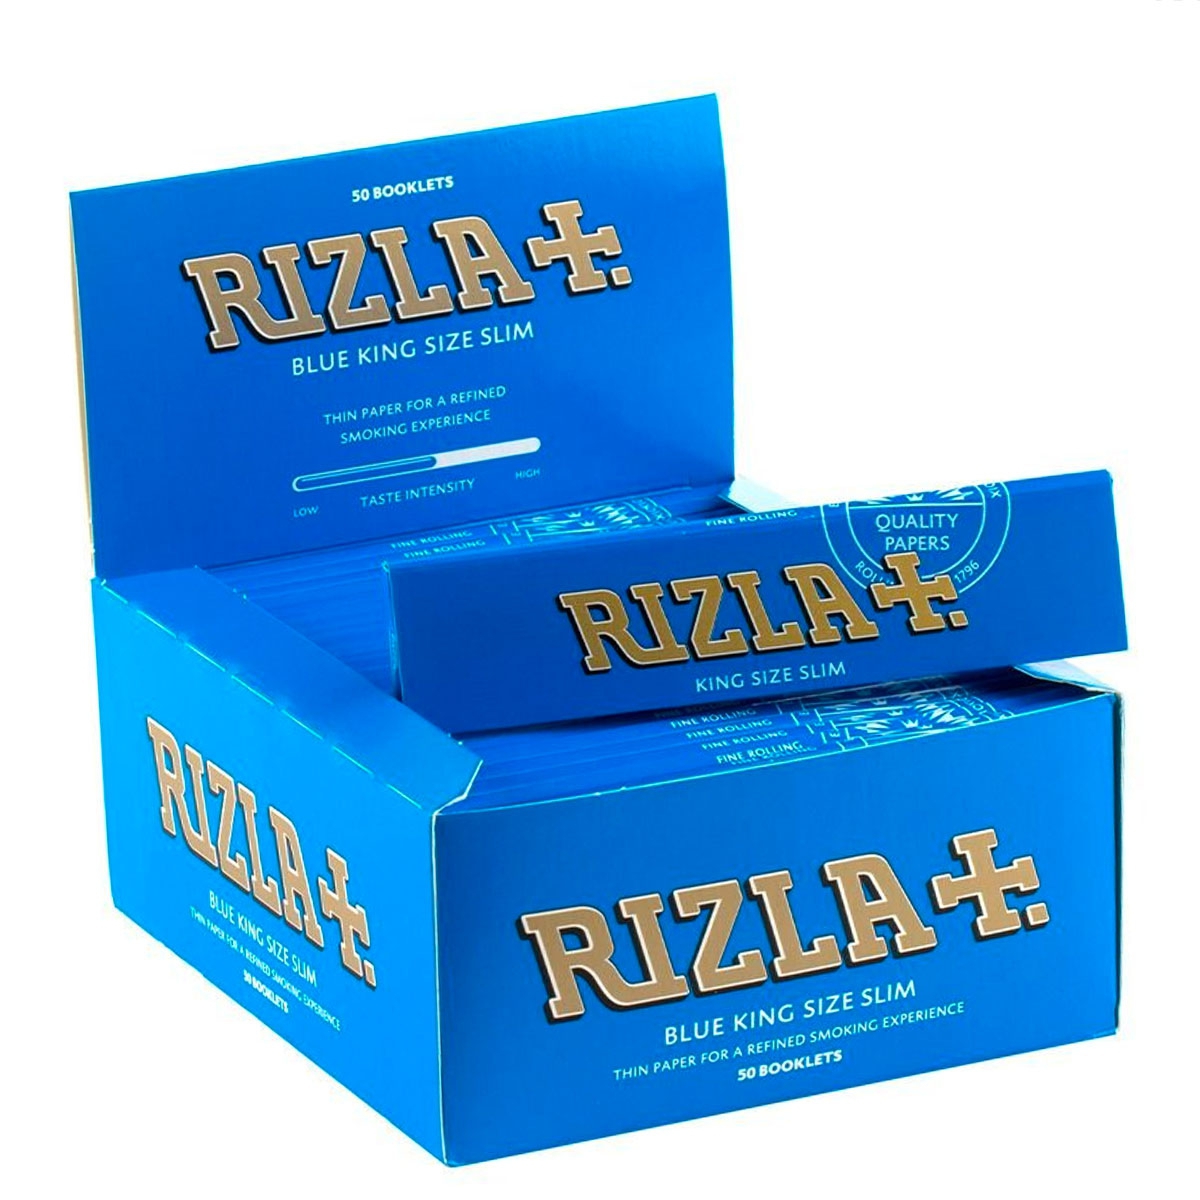 RIZLA GREEN BLUE REGULAR SMOKING ROLLING PAPERS WITH MULTIPLE BOOKLET ORIGINAL 